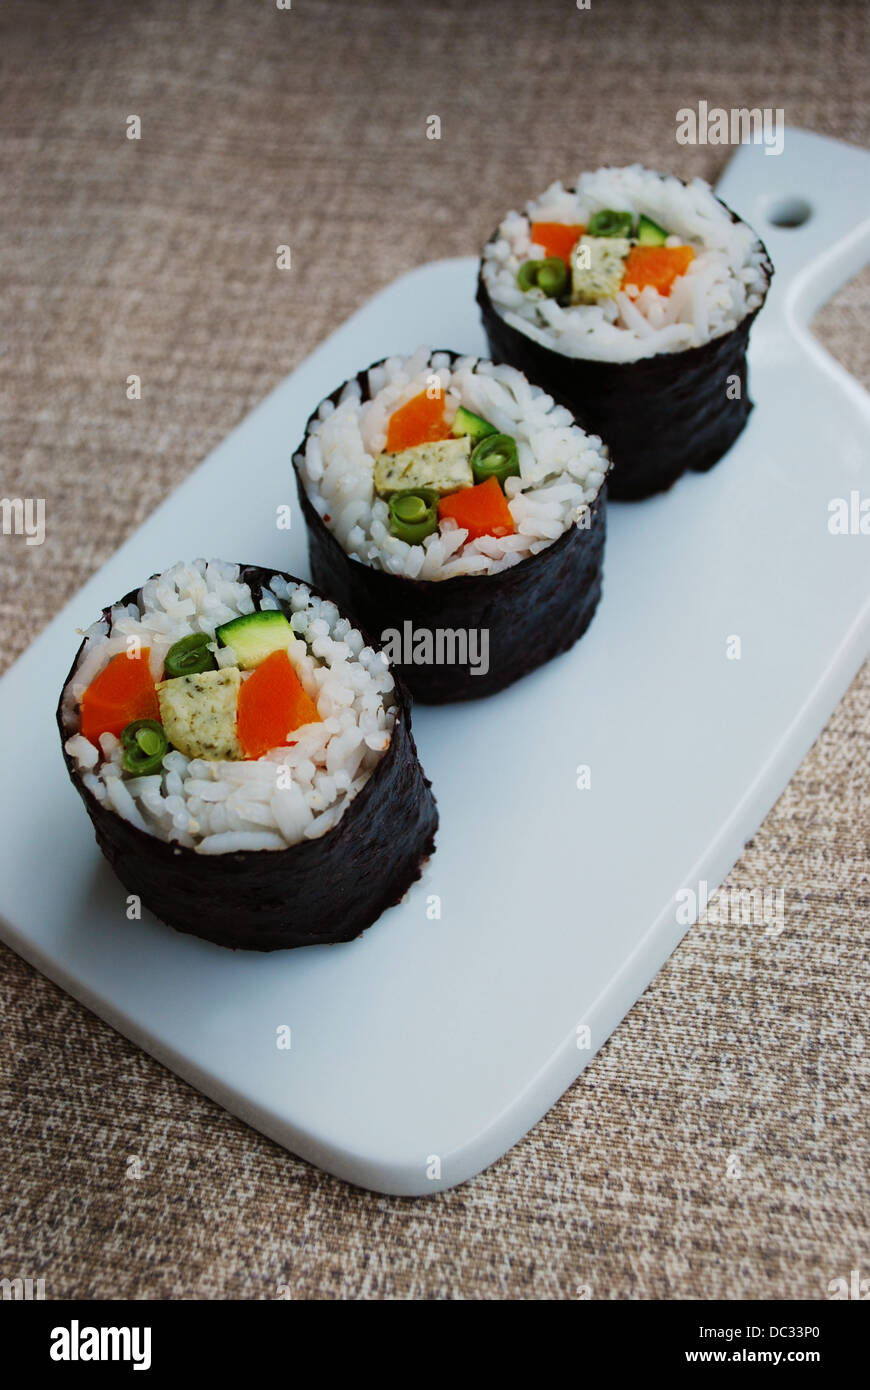 Japanese Rice Maki Sushi Roll Stuff with Tofu and Carrot Stock Image -  Image of gourmet, oriental: 99099549